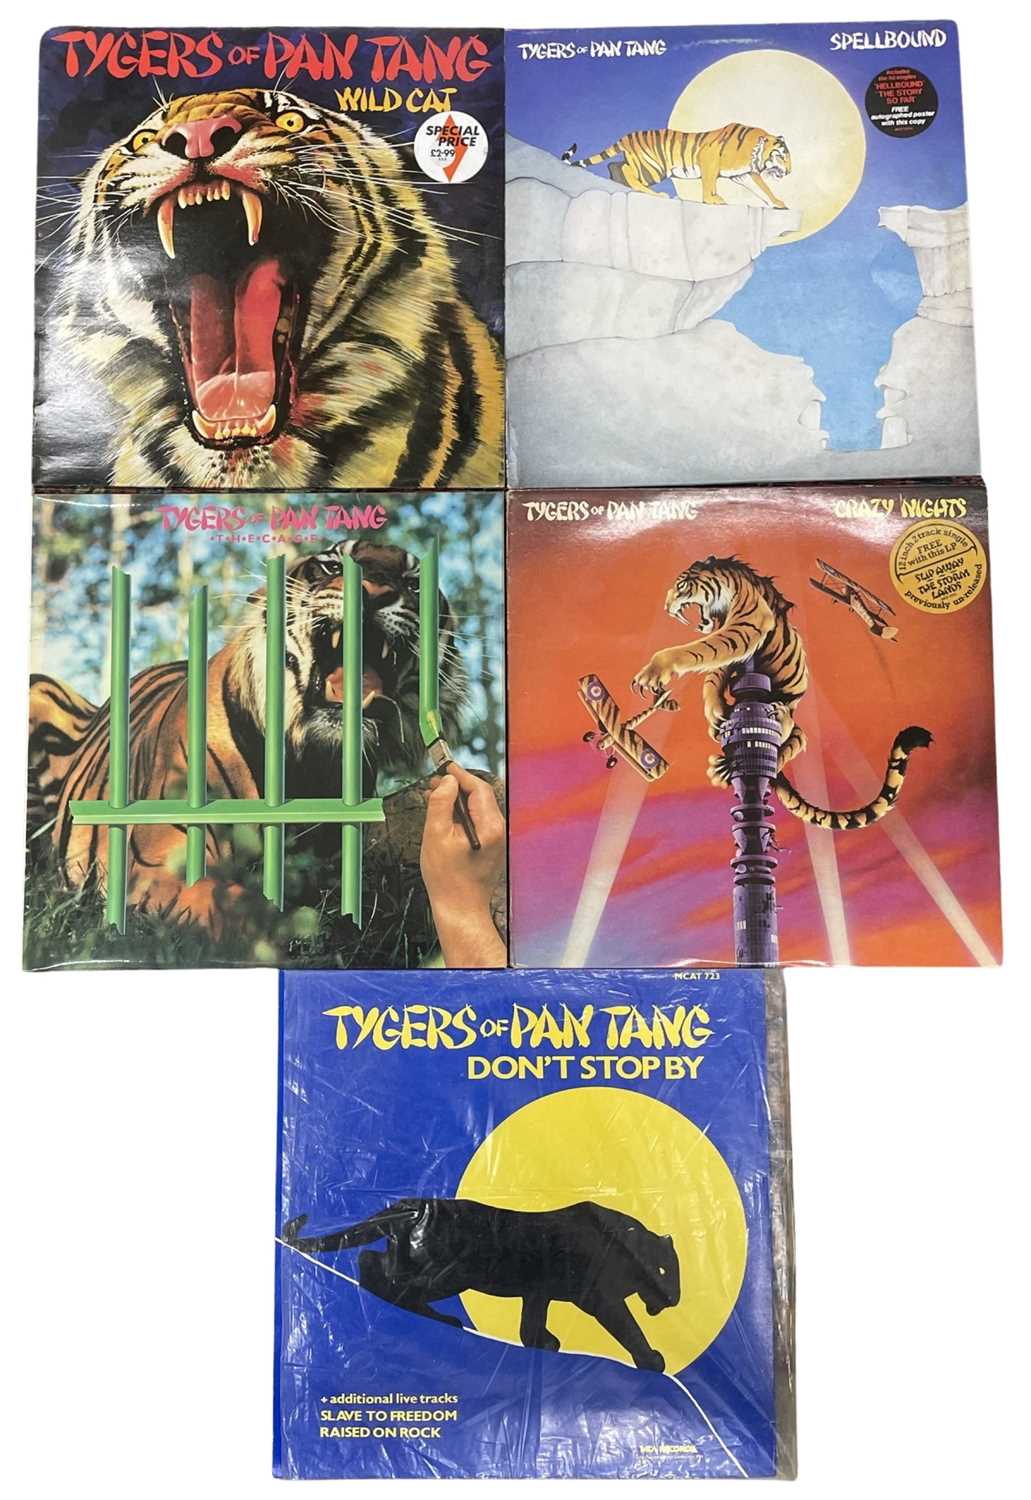 Five Tygers of Pan Tang 12" vinyl LPs, to include: - Wild Cat, 1980, MCA, MCL 1610 - Spellbound,